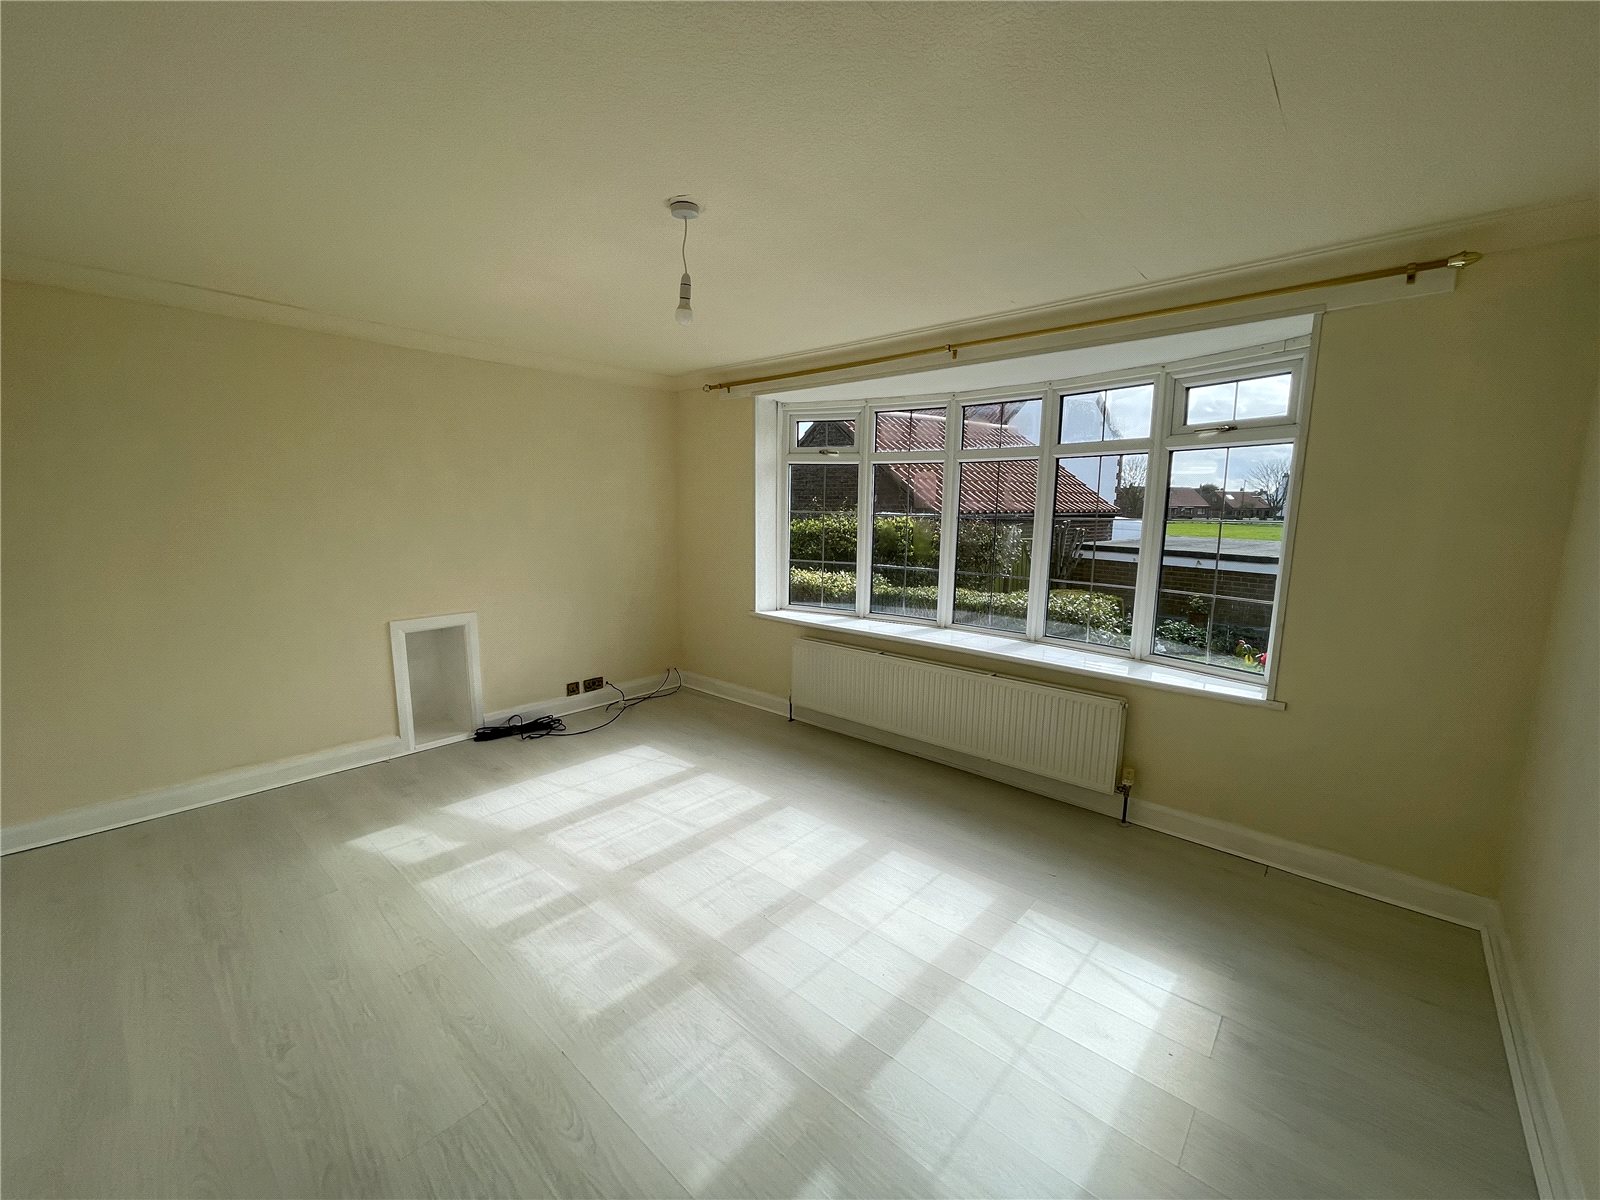 3 bed house for sale in Mereside, Flamborough  - Property Image 10